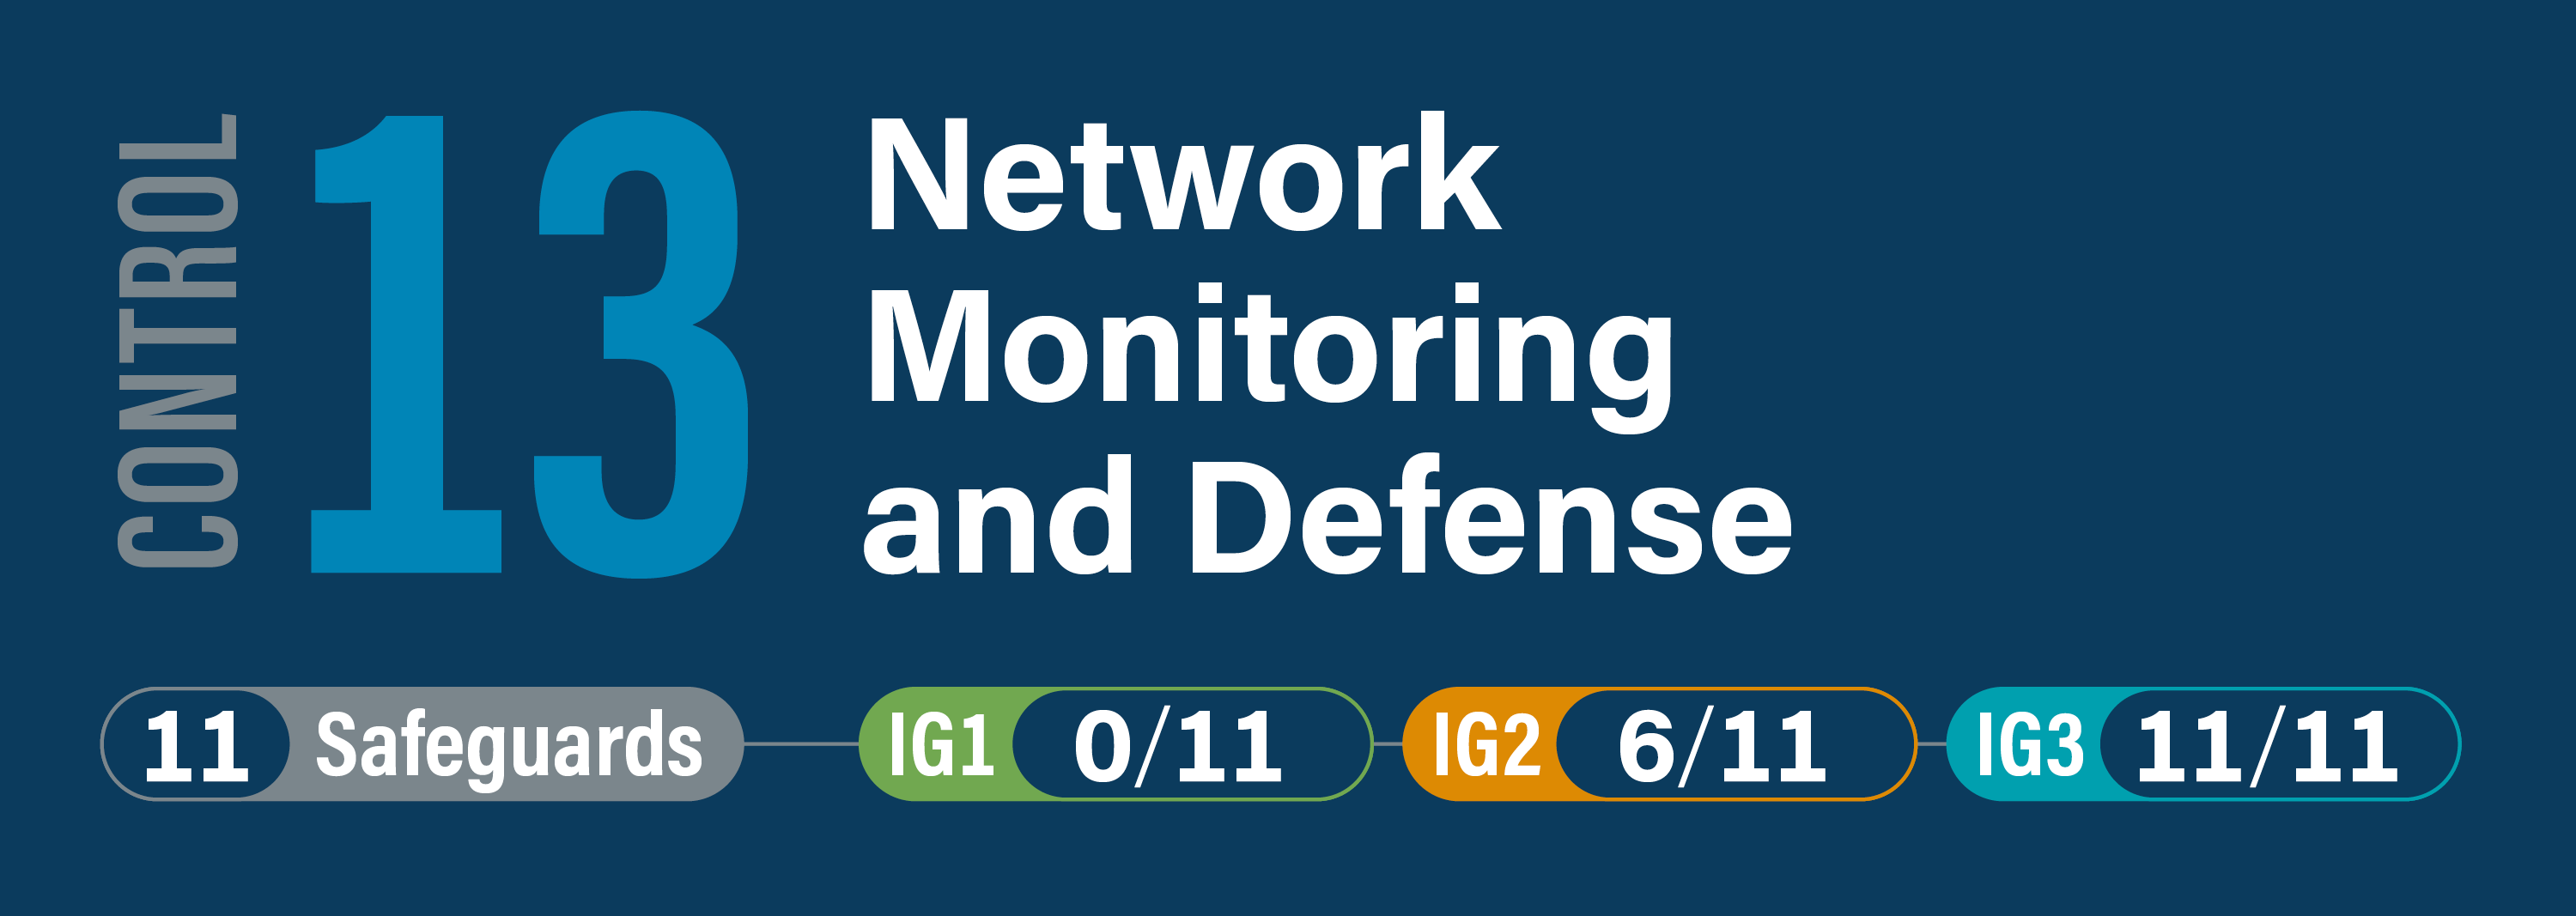 cis control 13 network monitoring and defense